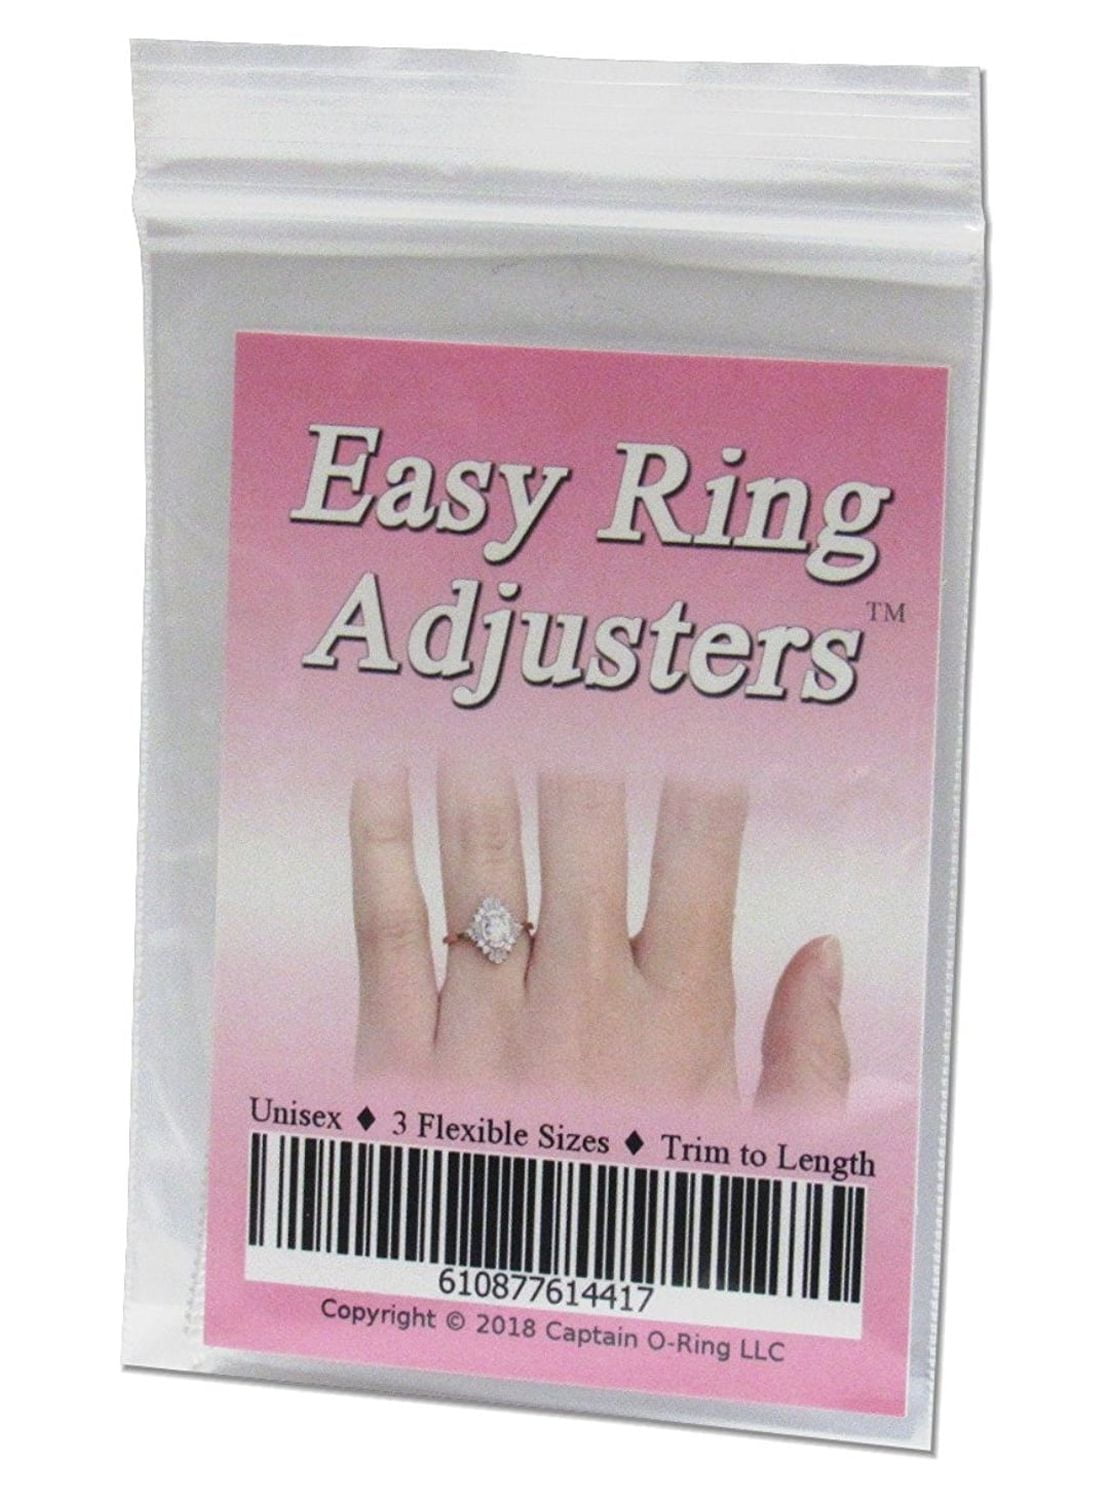  5 STARS UNITED Ring Sizers for Loose Rings - 8-Pack Easy-Clip  Ring Size Adjuster for 1-10 mm Band Widths - Ring Guards for Women and Men  : Arts, Crafts & Sewing